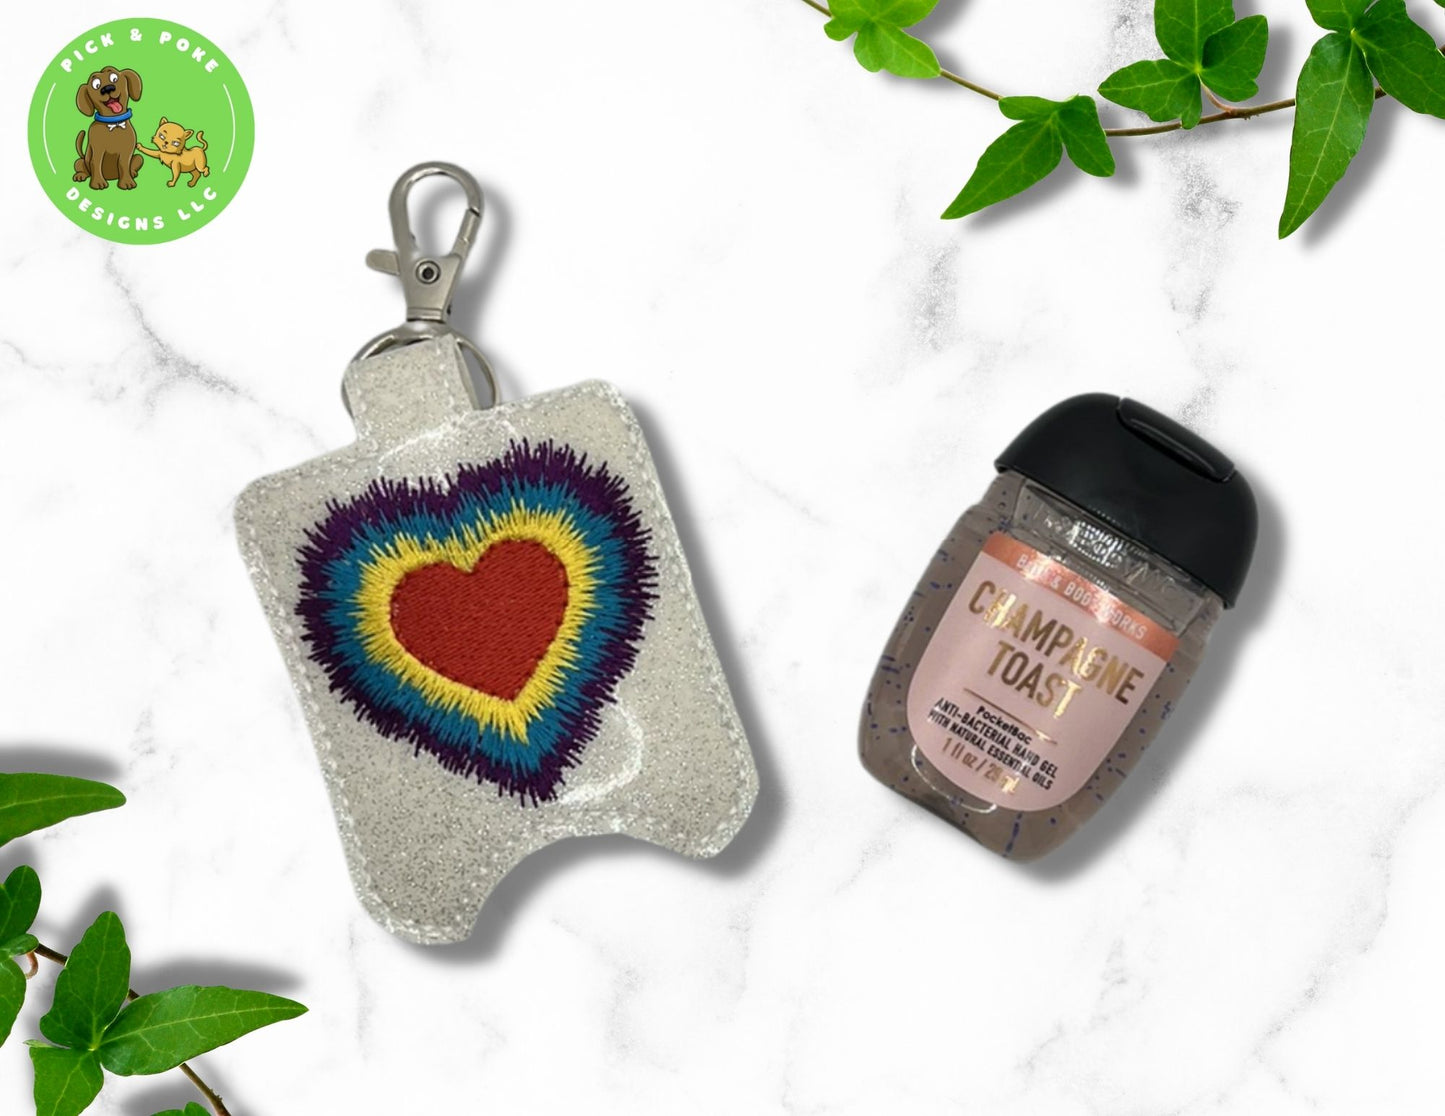 Tie-Dye Heart Sanitizer Holder Key Chain | Embroidered on Vinyl | Made to Order